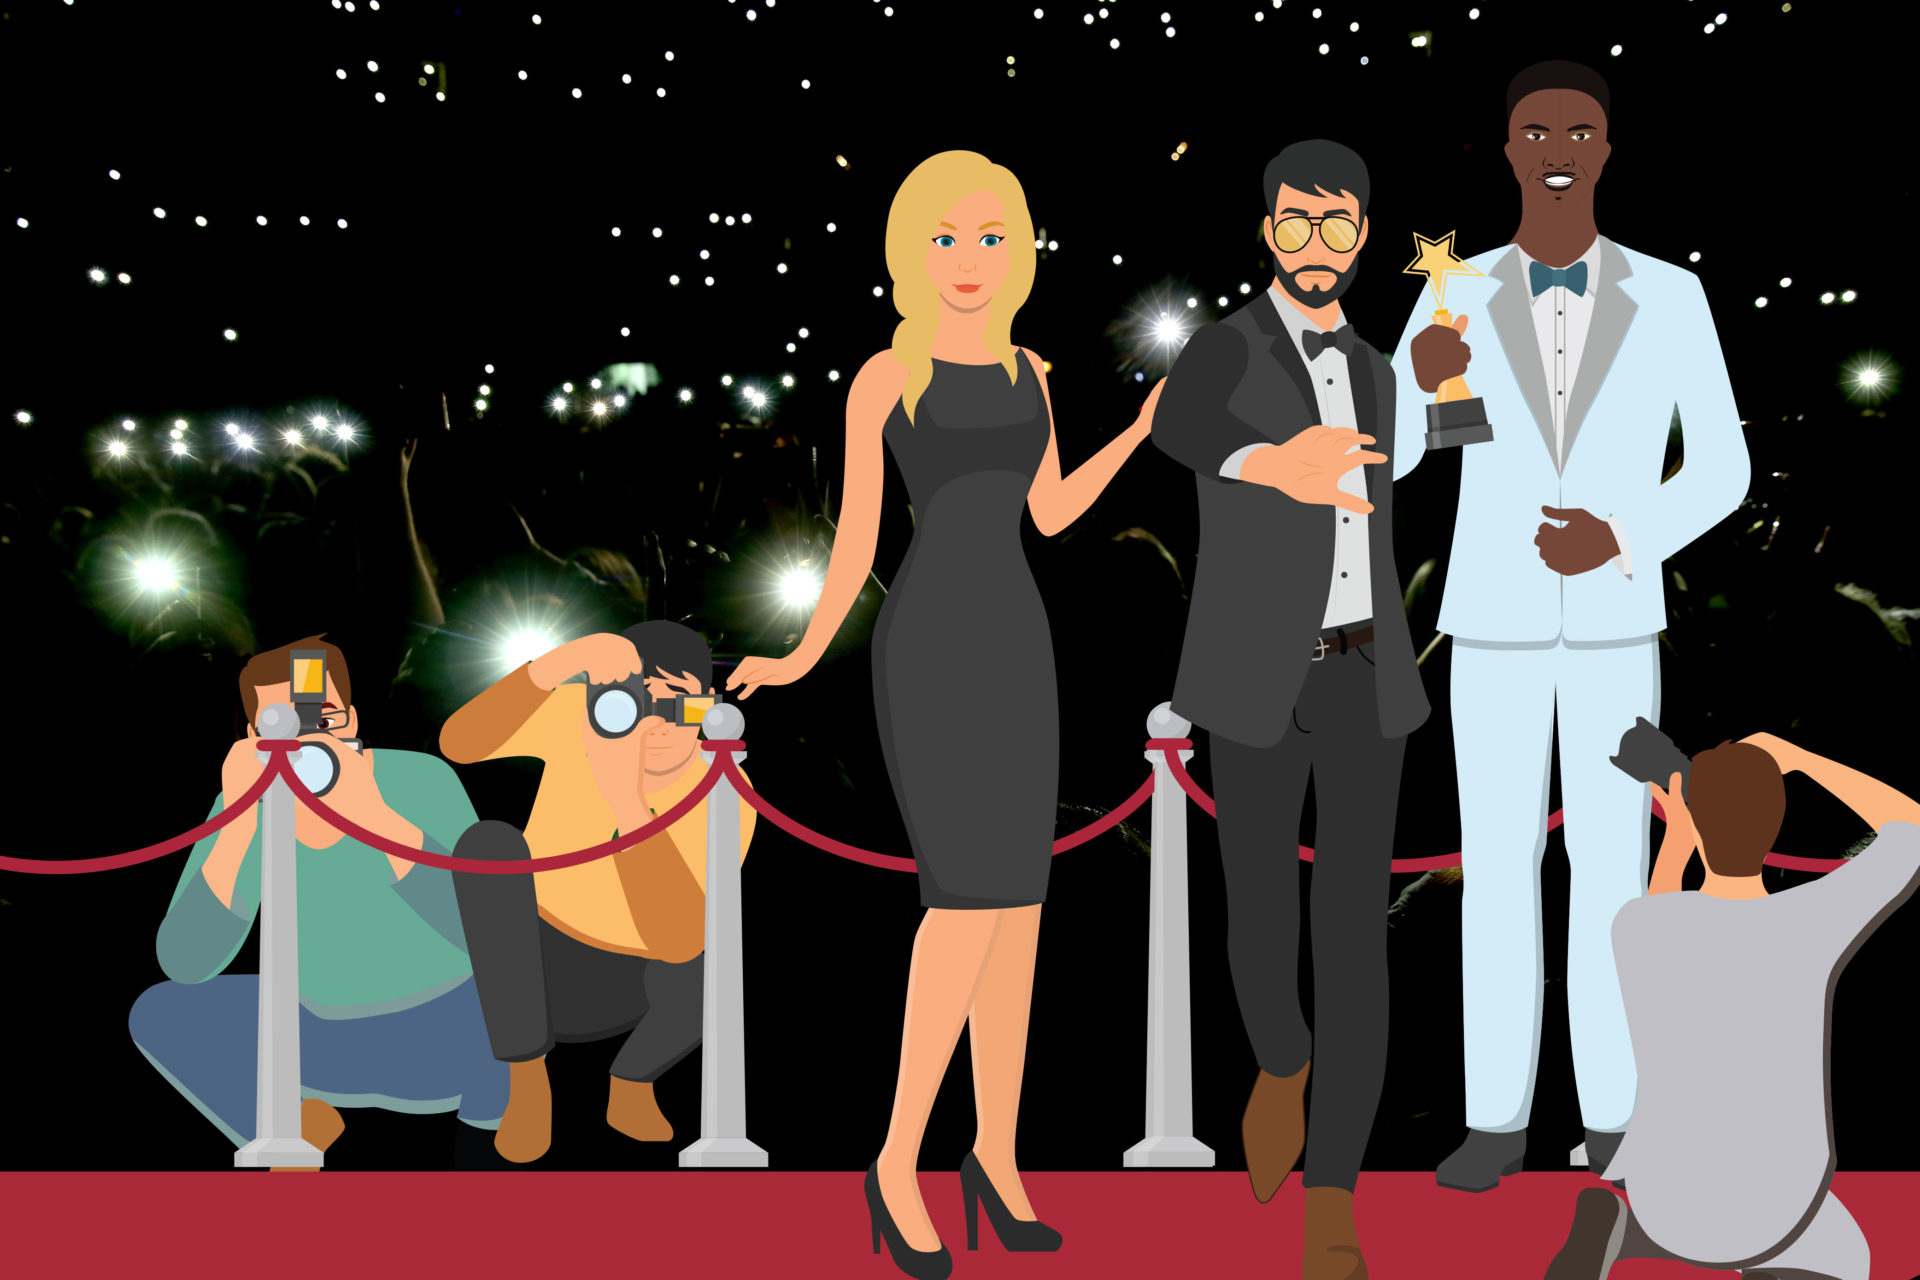 Three famous deaf people on a red carpet posing for the cameras. They are clearly famous actors. Paparazzi are surrounding them. Lights shine in the distance.